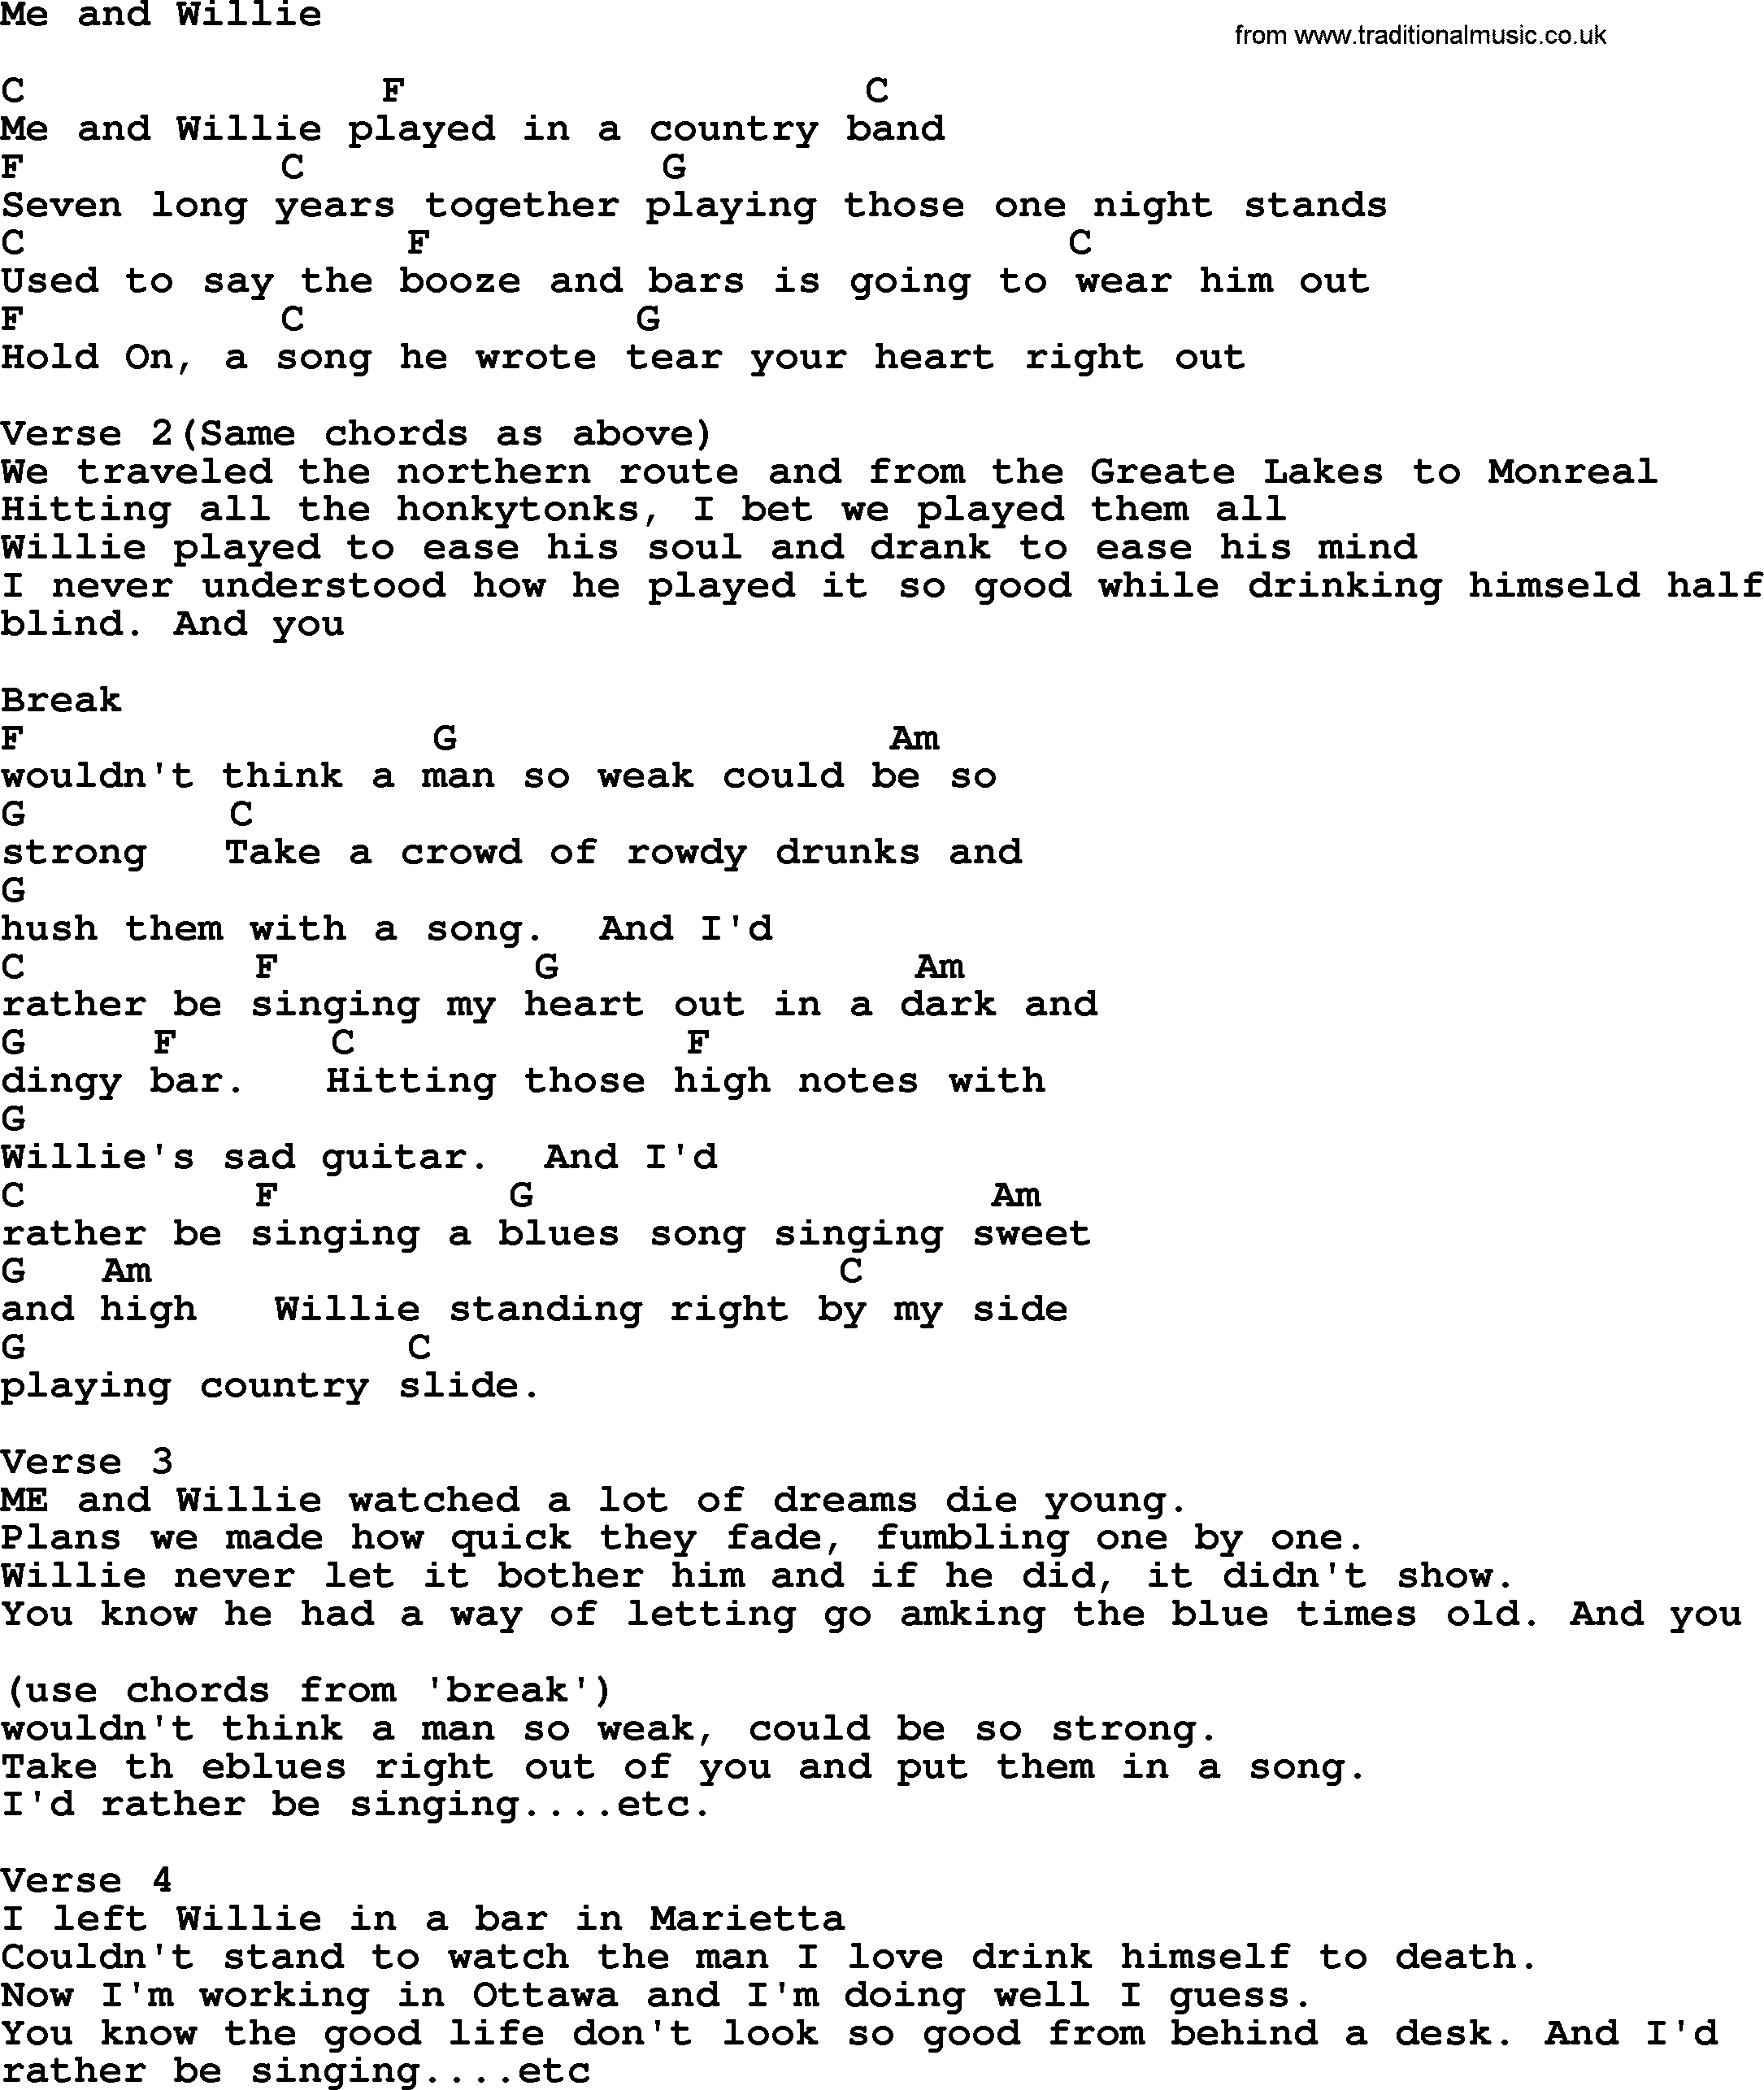 Emmylou Harris song: Me and Willie lyrics and chords